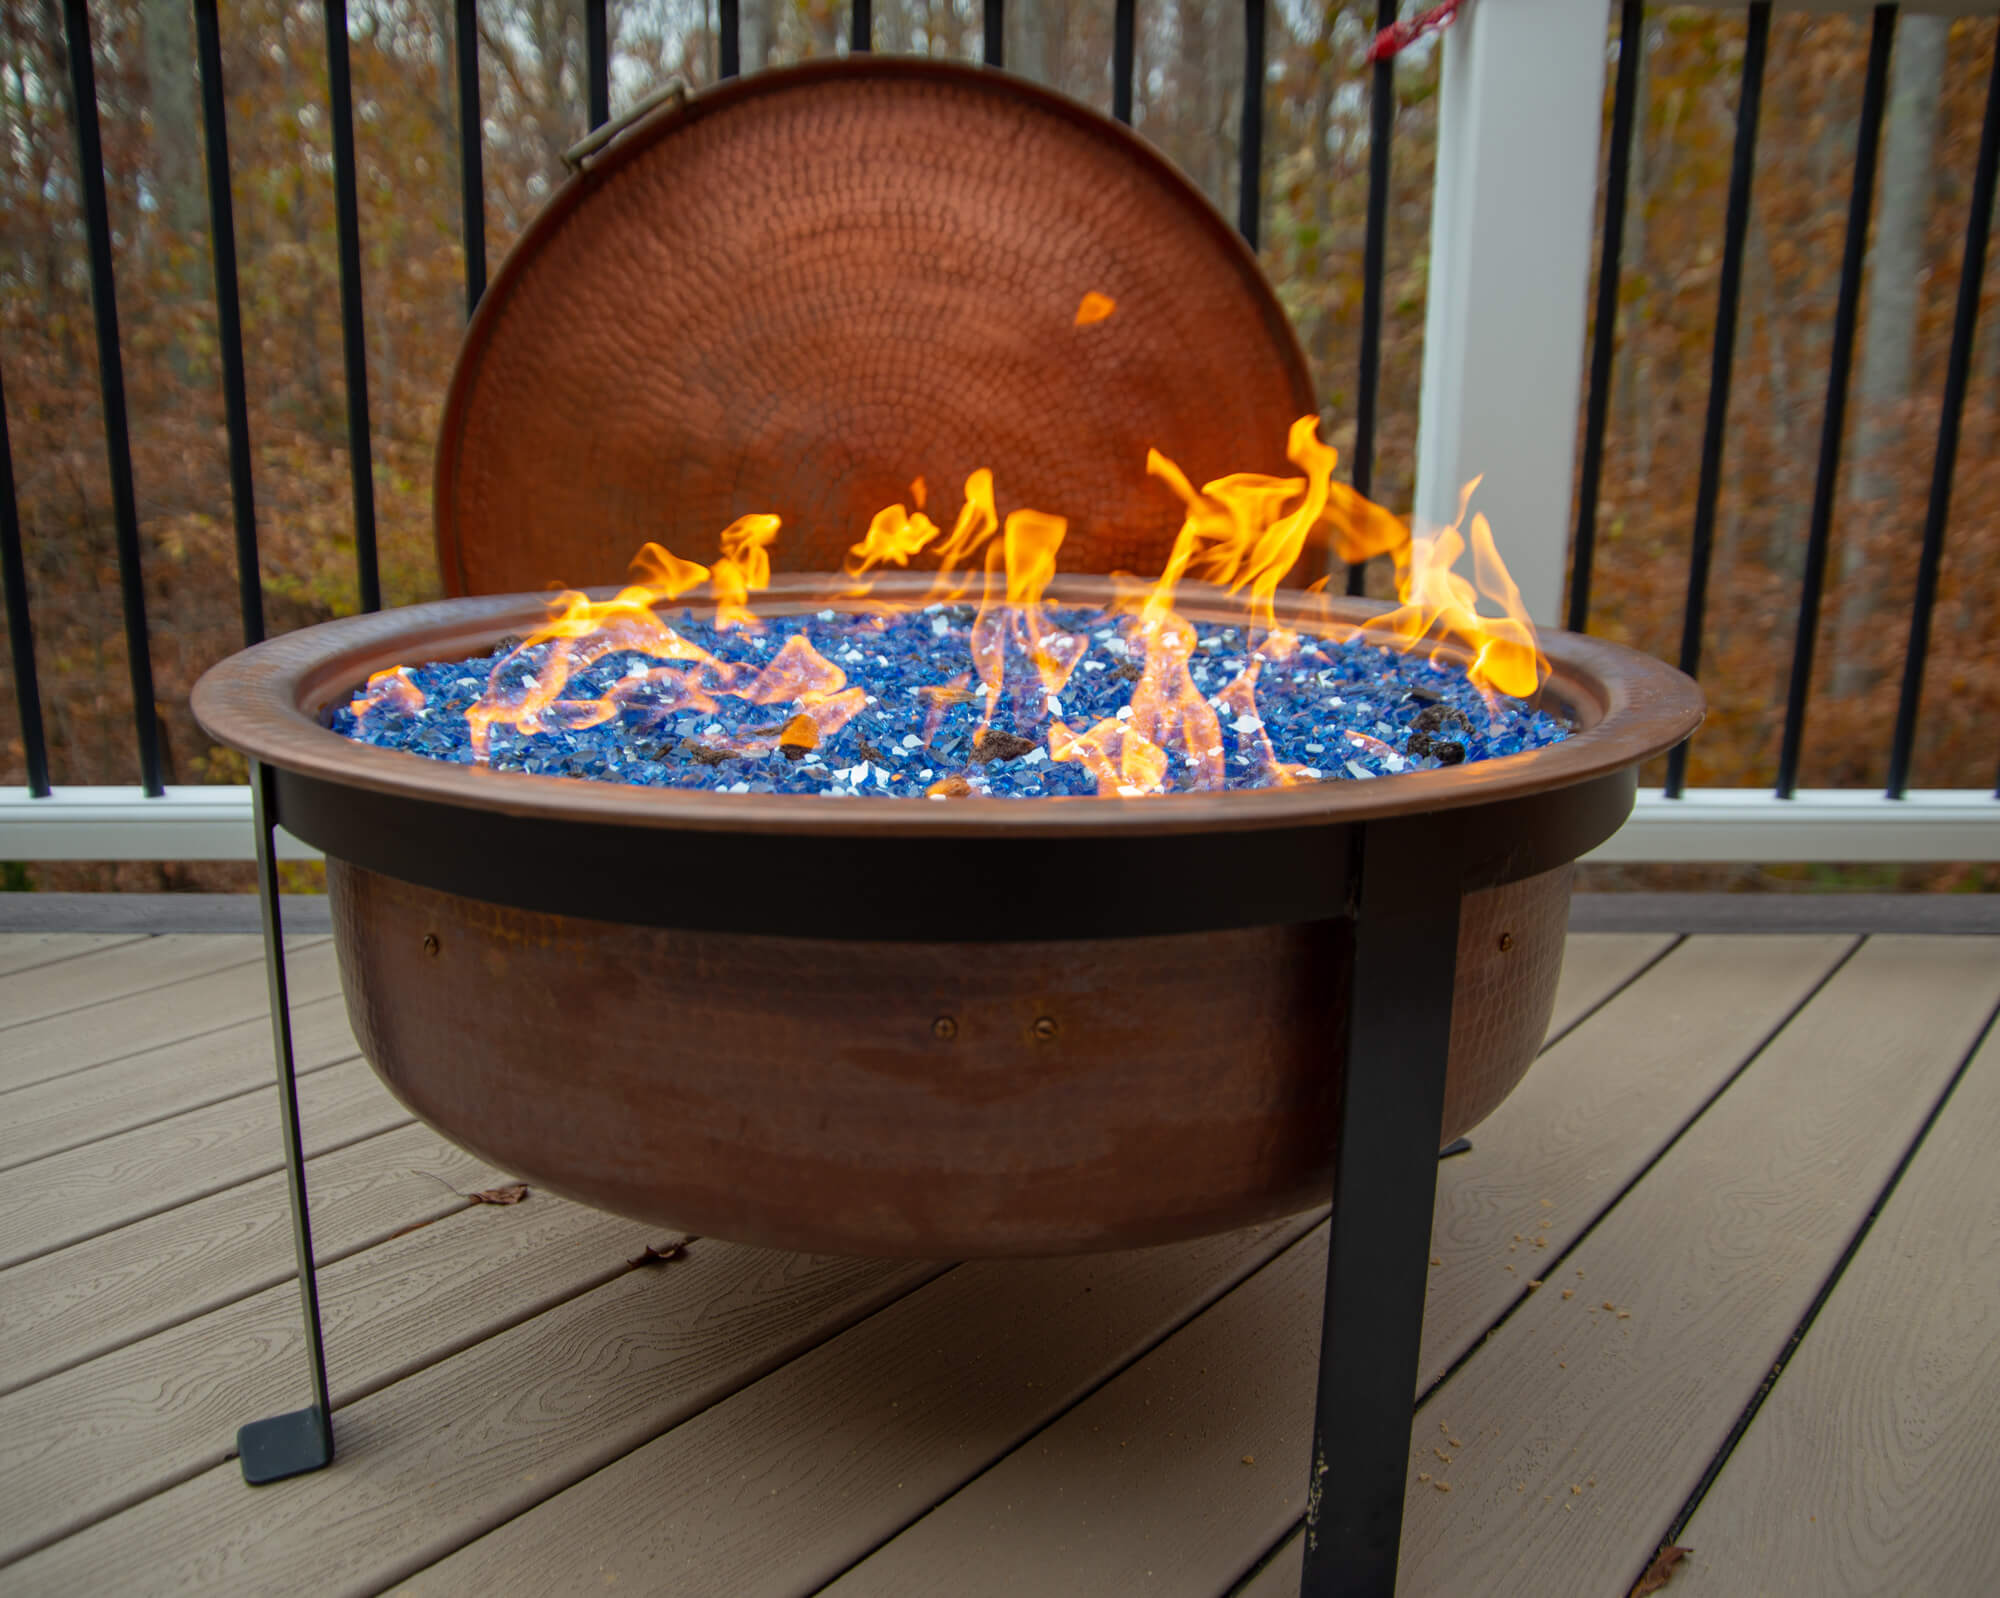 6 Ways To Put A Fire Pit On Wooden Deck, Can You Put A Gas Fire Pit On Wood Deck